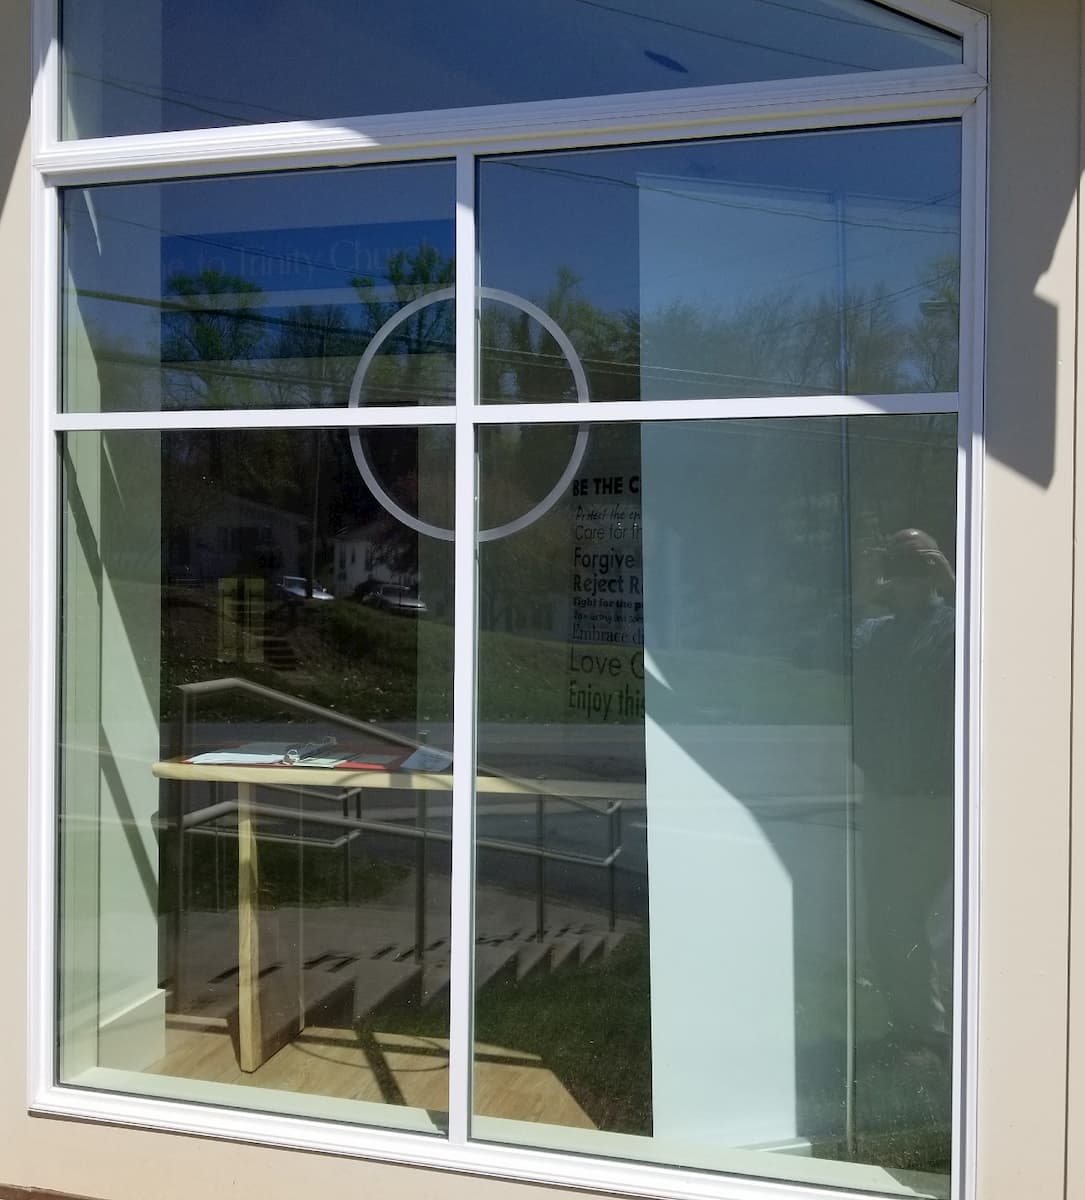 Exterior view of custom wood window with cross grille pattern